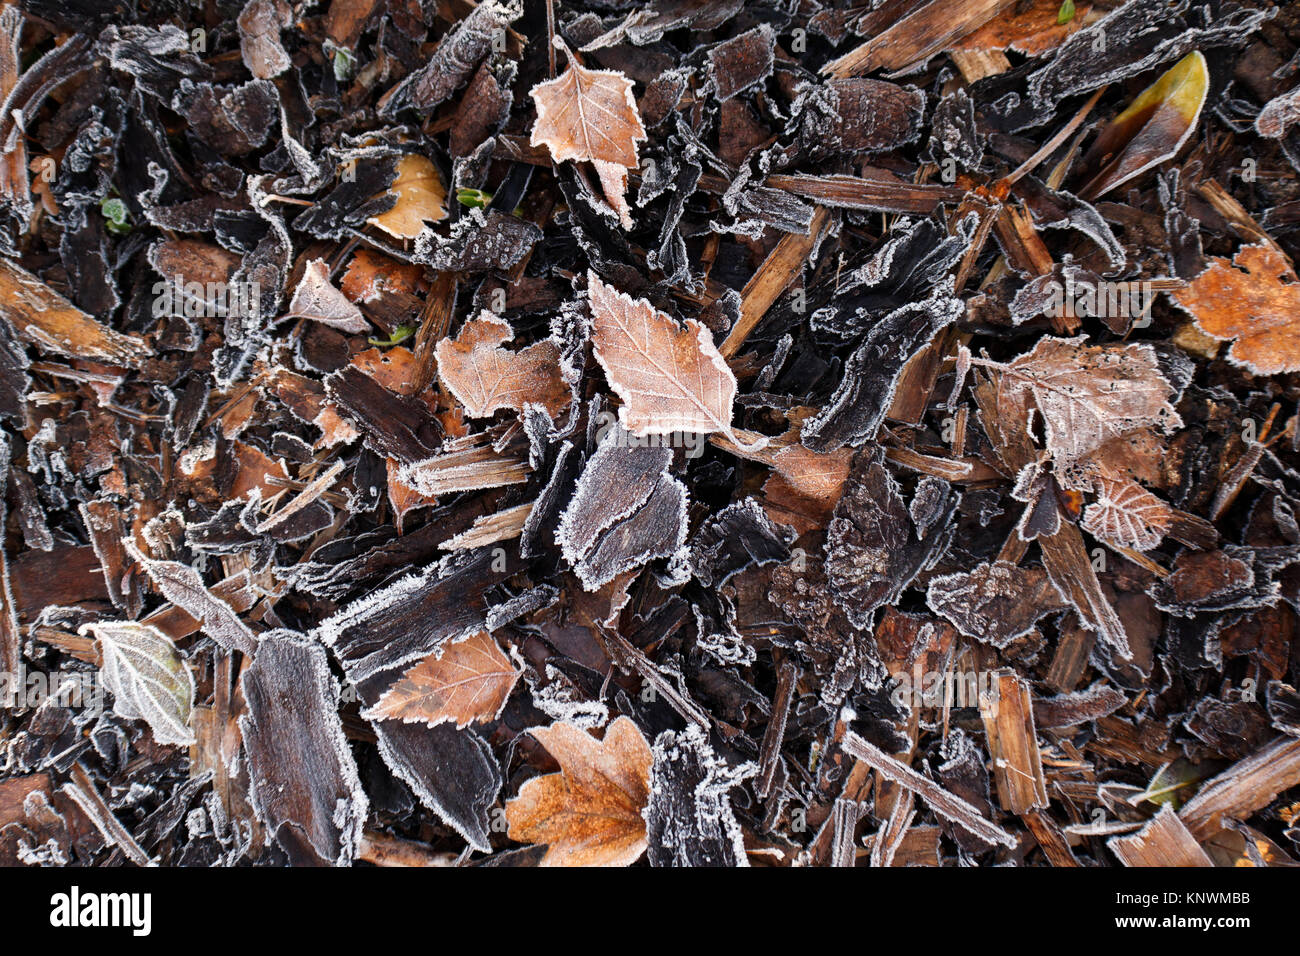 Frosted wood bark in forest floor. Forest soil texture background. Stock Photo